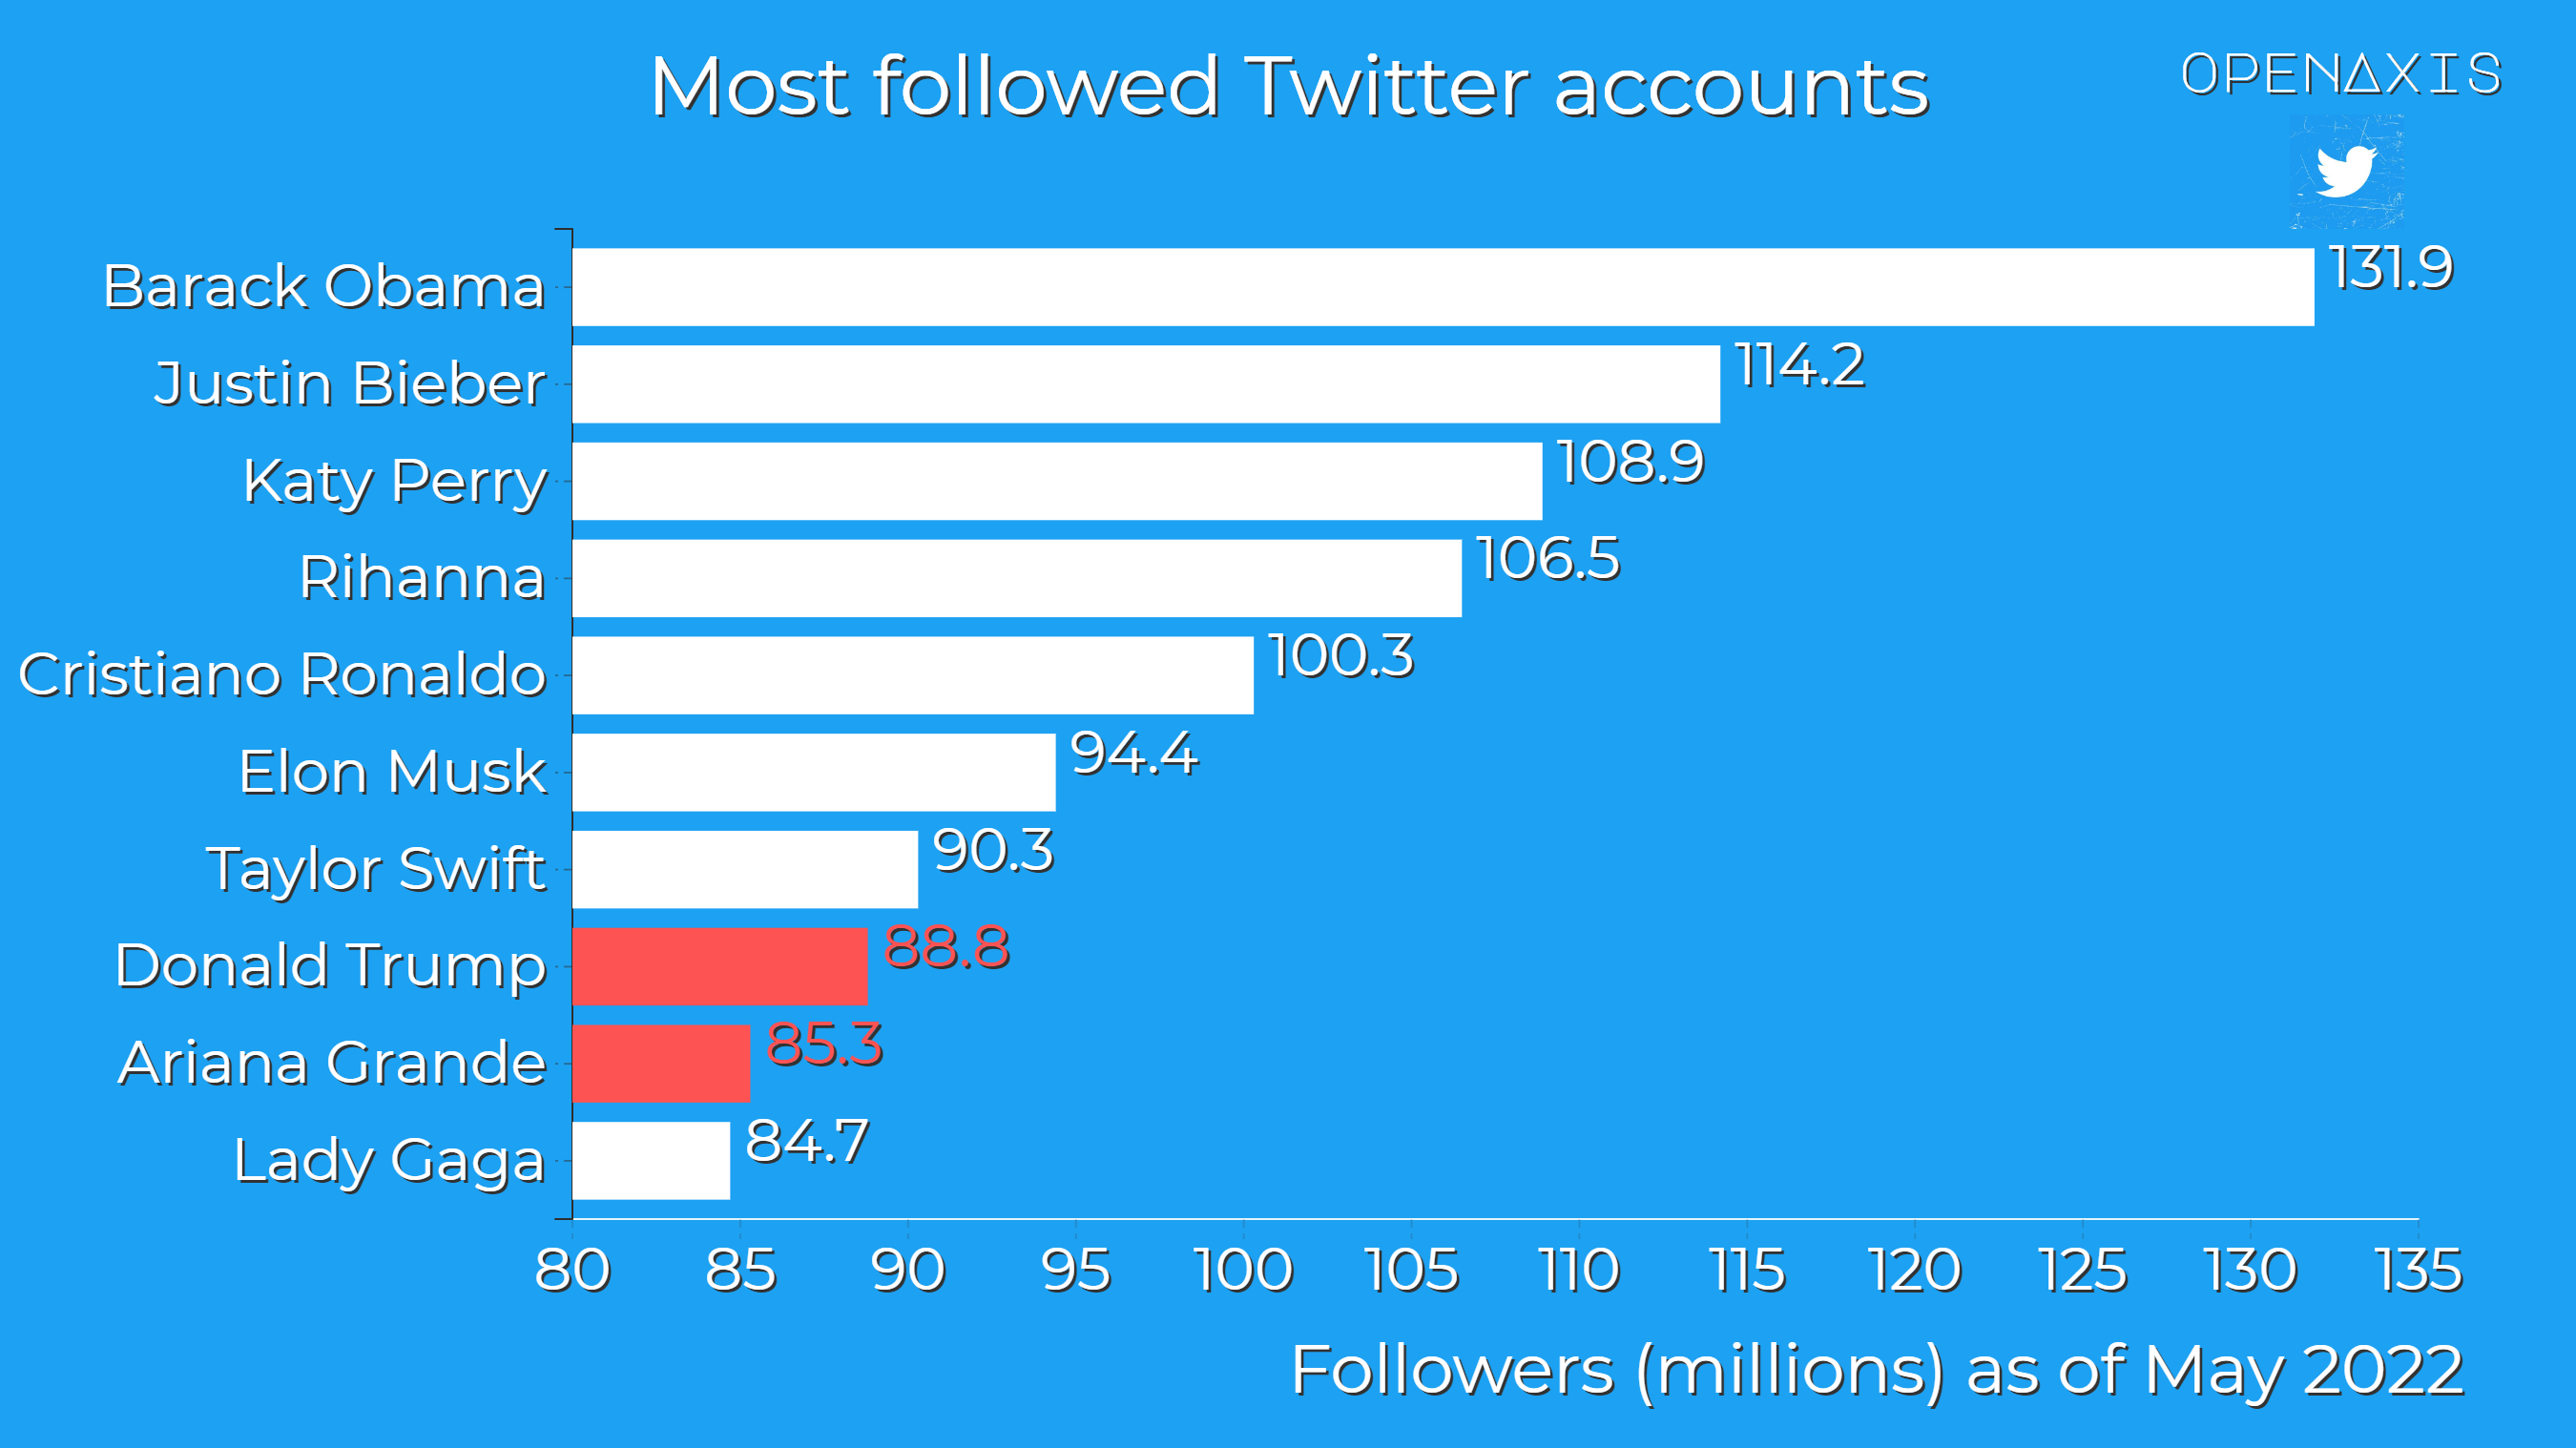 <p>The dataset lists the top 50 most-followed accounts on Twitter, with each total rounded to the nearest hundred thousand, as well as the profession or activity of each user.</p><p><br /></p><p>Account totals and monthly changes in ranking were updated on May 12, 2022. The list includes, without ranking them, accounts that were suspended or deleted while they had enough followers to be part of the top 50, such as (with the 7th most followers in all of Twitter) Donald Trump and Ariana Grande.</p><p><br /></p><p>﻿<a href="http:///search?q=%23twitter" target="_blank">#twitter</a>﻿ ﻿<a href="http:///search?q=%23socialmedia" target="_blank">#socialmedia</a>﻿ </p><p><br /></p><p>Source: <a href="https://app.openaxis.com/data/3764" target="_blank">Twitter, Wikipedia</a></p><p><br /></p>